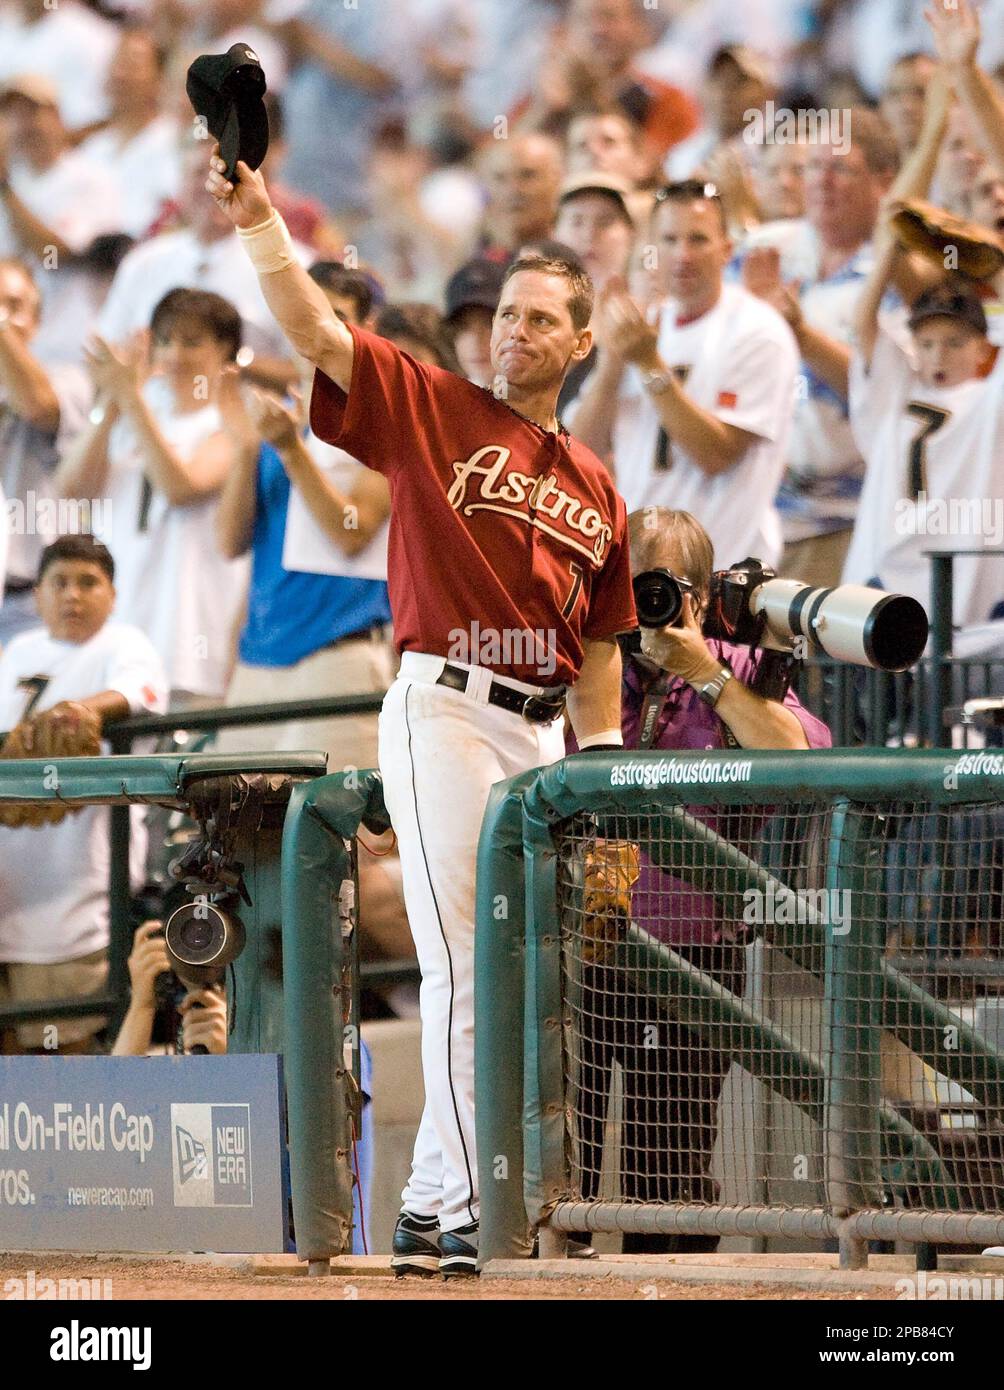 Houston Astros second baseman Craig Biggio tips his cap to the sellout  crowd as he leaves the game in the eighth inning on a day that was  dedicated to his 3000-hit milestone